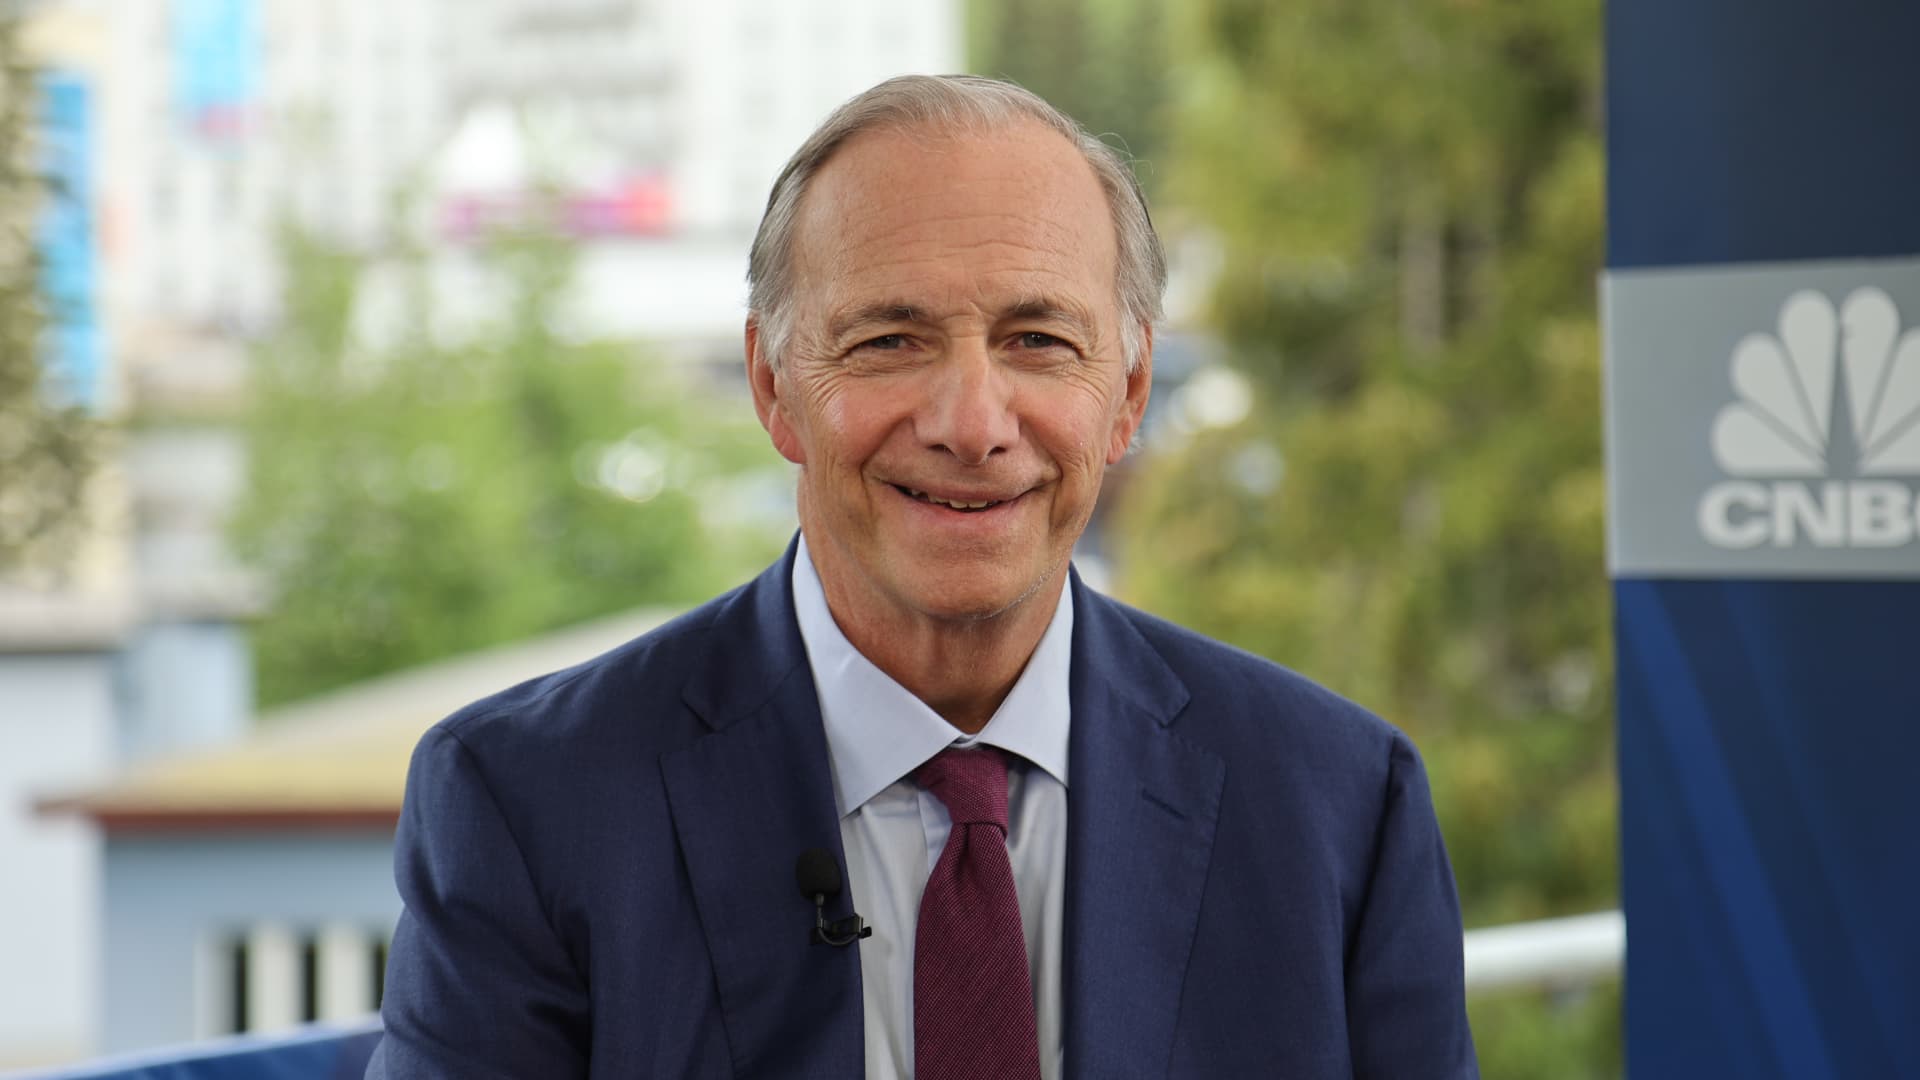 Ray Dalio relinquishes control of Bridgewater as part of succession plan